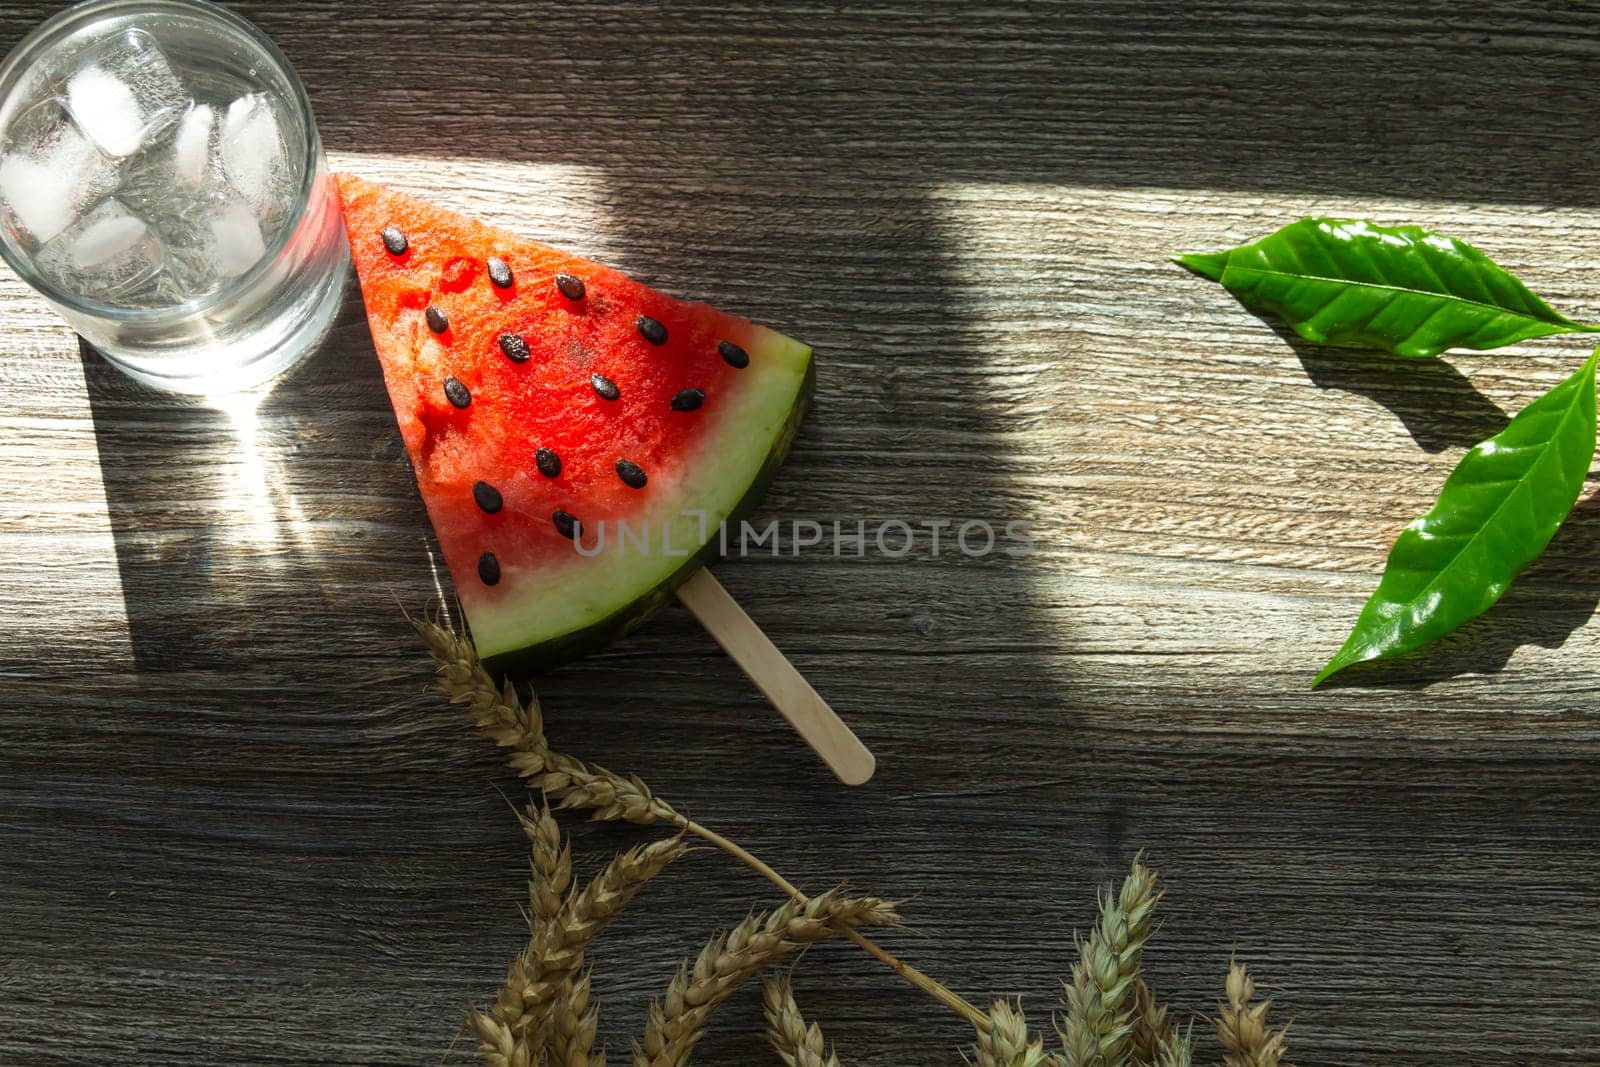 A triangular piece of sweet watermelon on an ice cream shelf, a cold drink with ice and ripe wheat ears on a wooden surface.,,